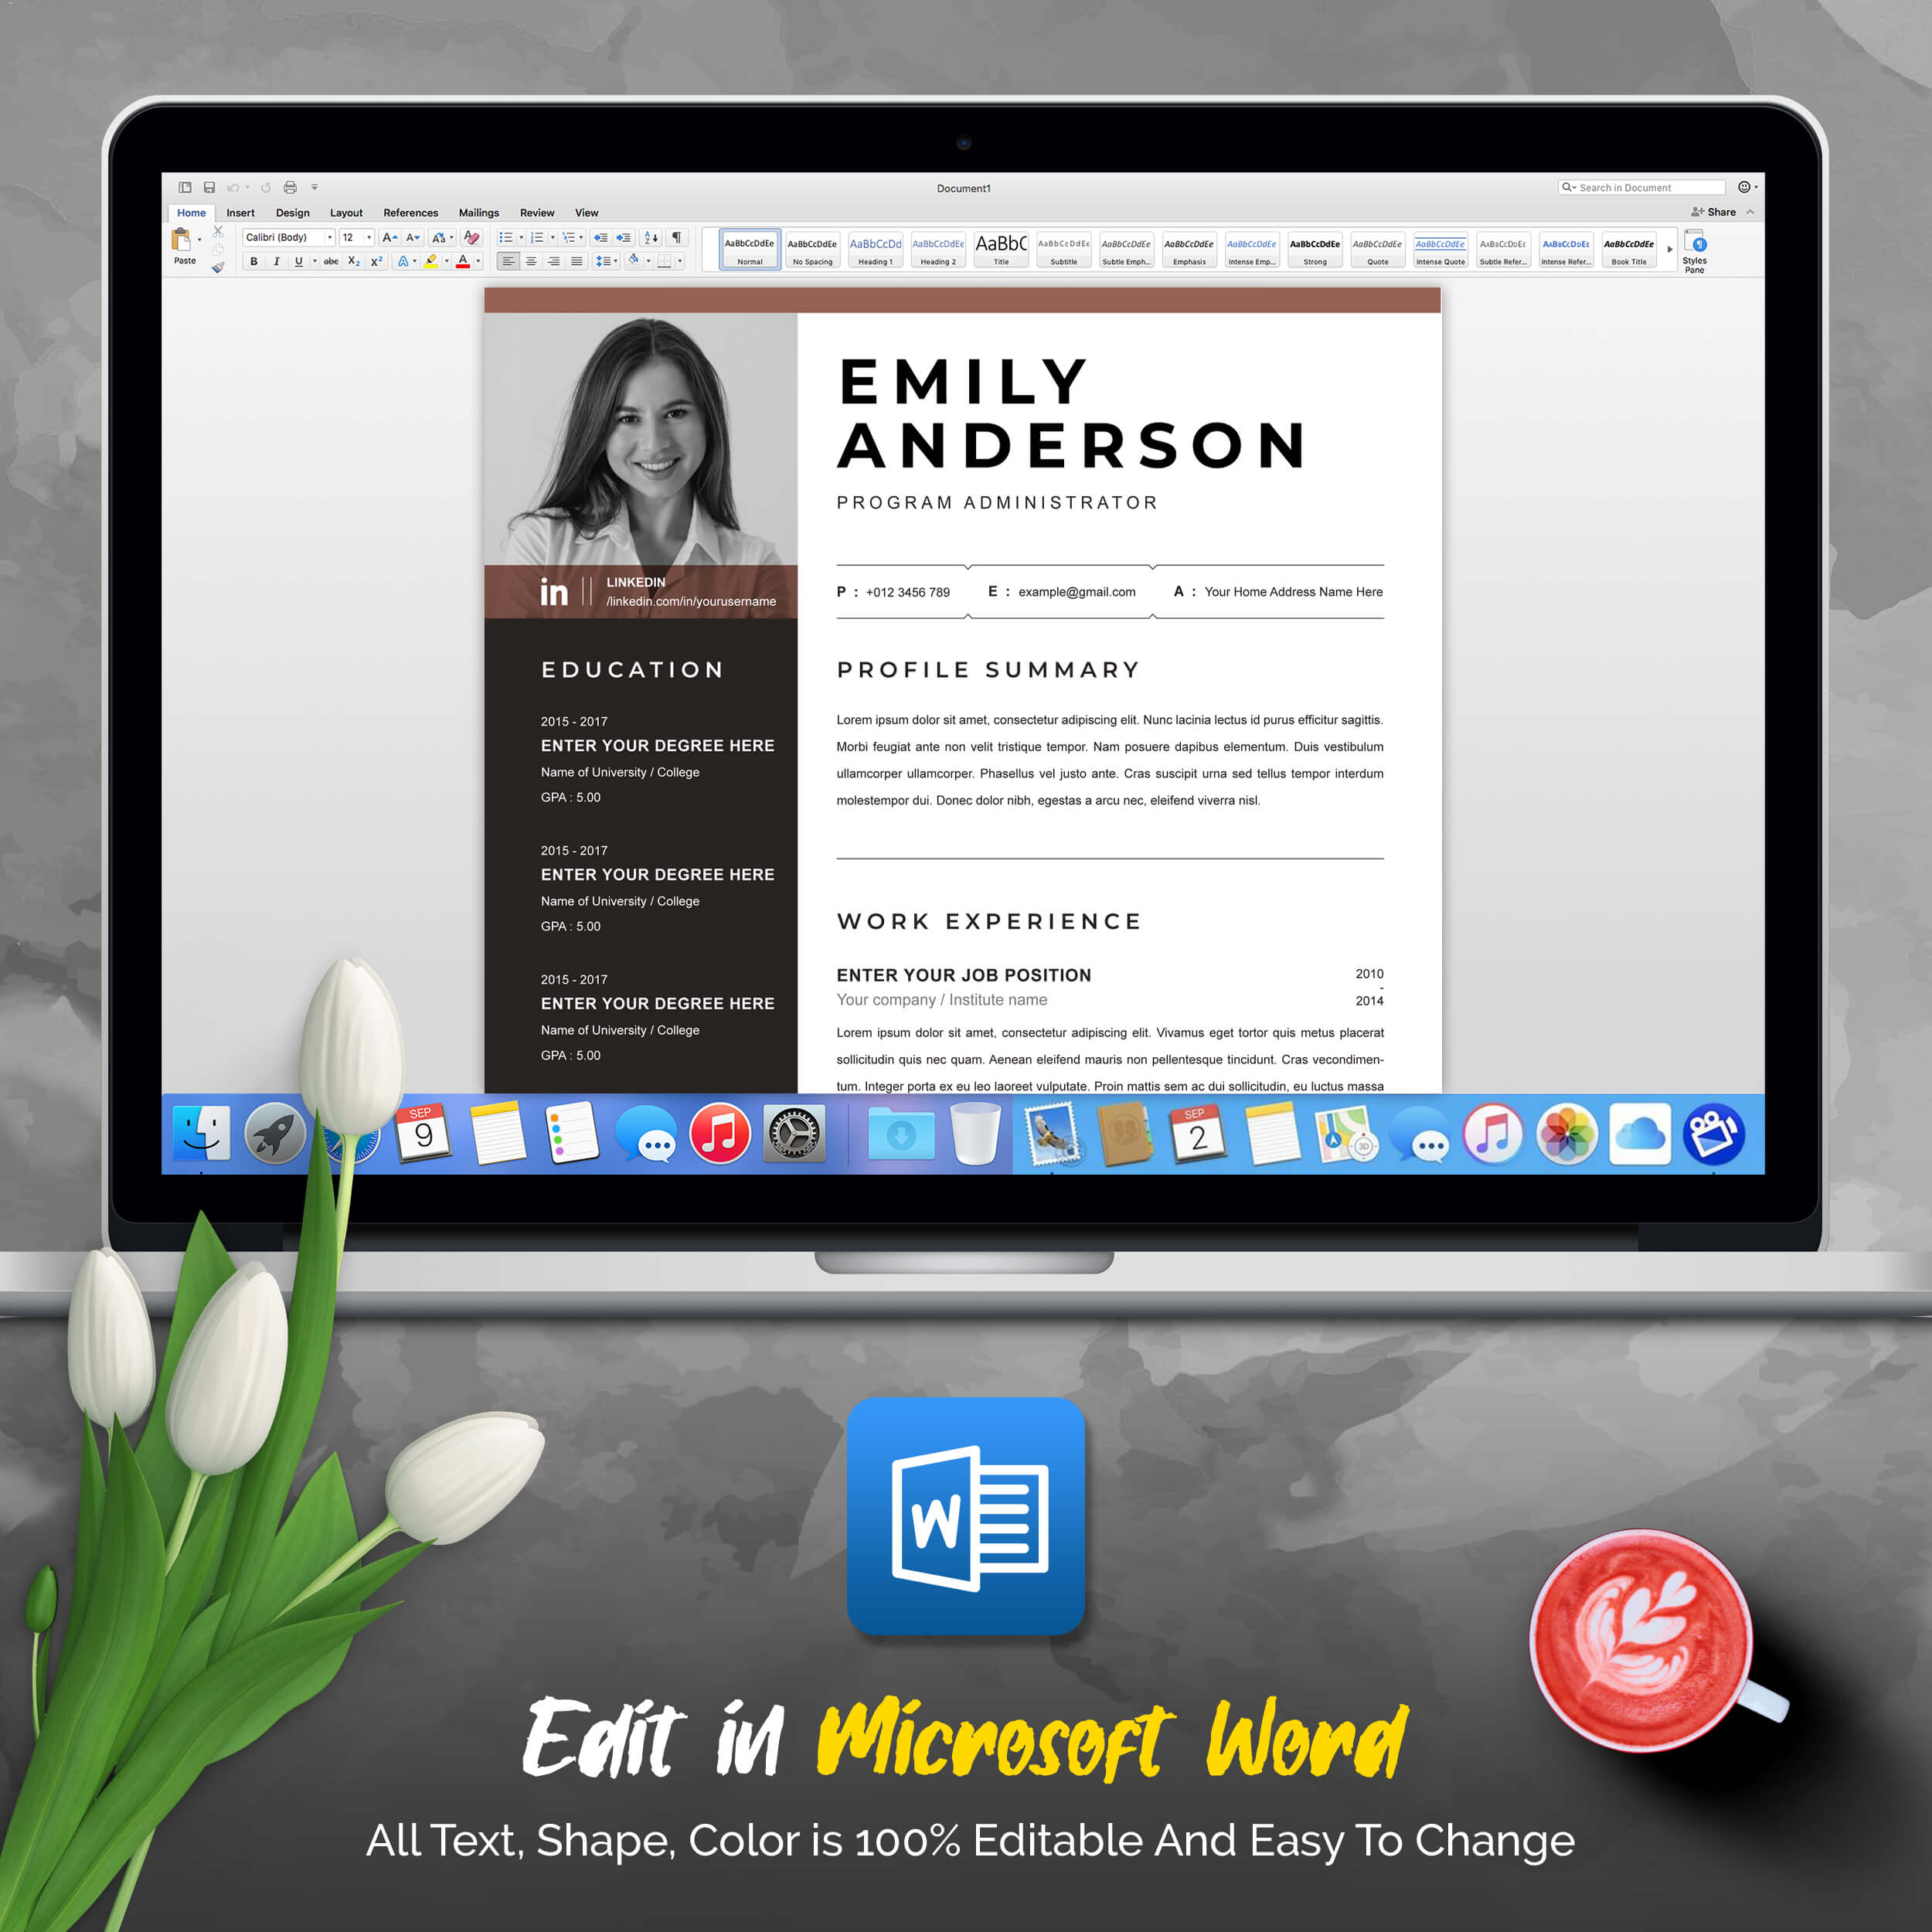 04 3 pages professional ms word aple pages eps photoshop psd resume cv design template design by resume inventor 1 904